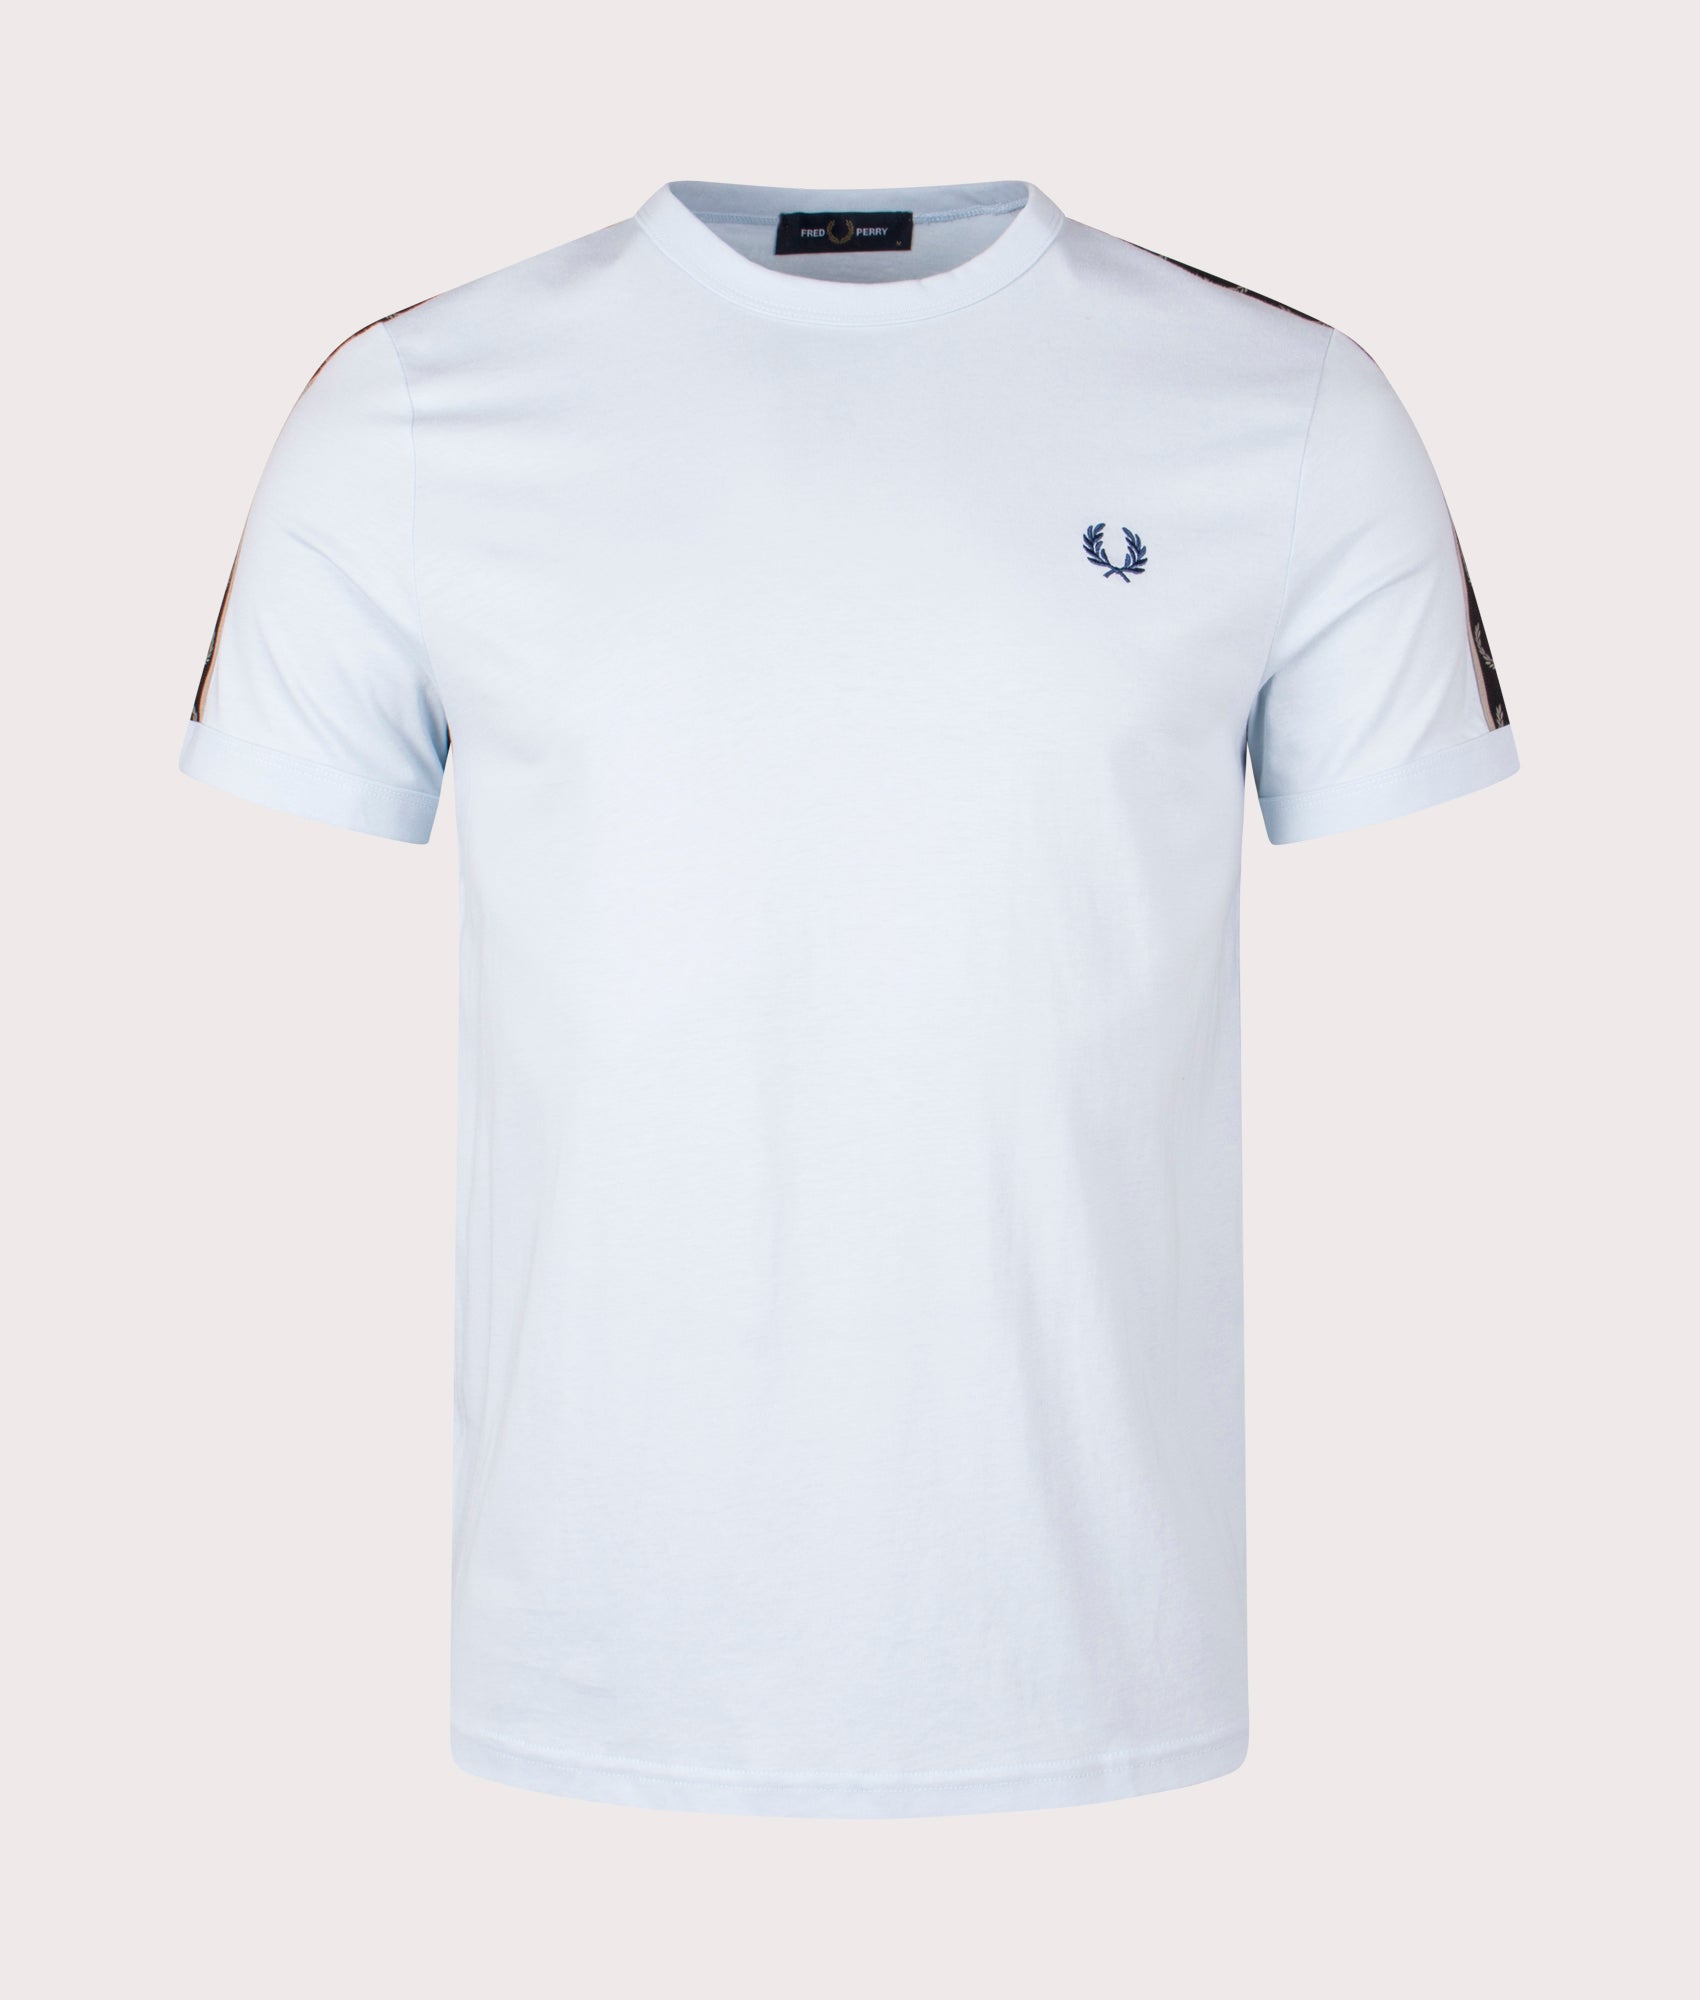 Fred Perry Mens Contrast Tape Ringer T-Shirt - Colour: V27 Light Ice/Warm Grey - Size: Medium